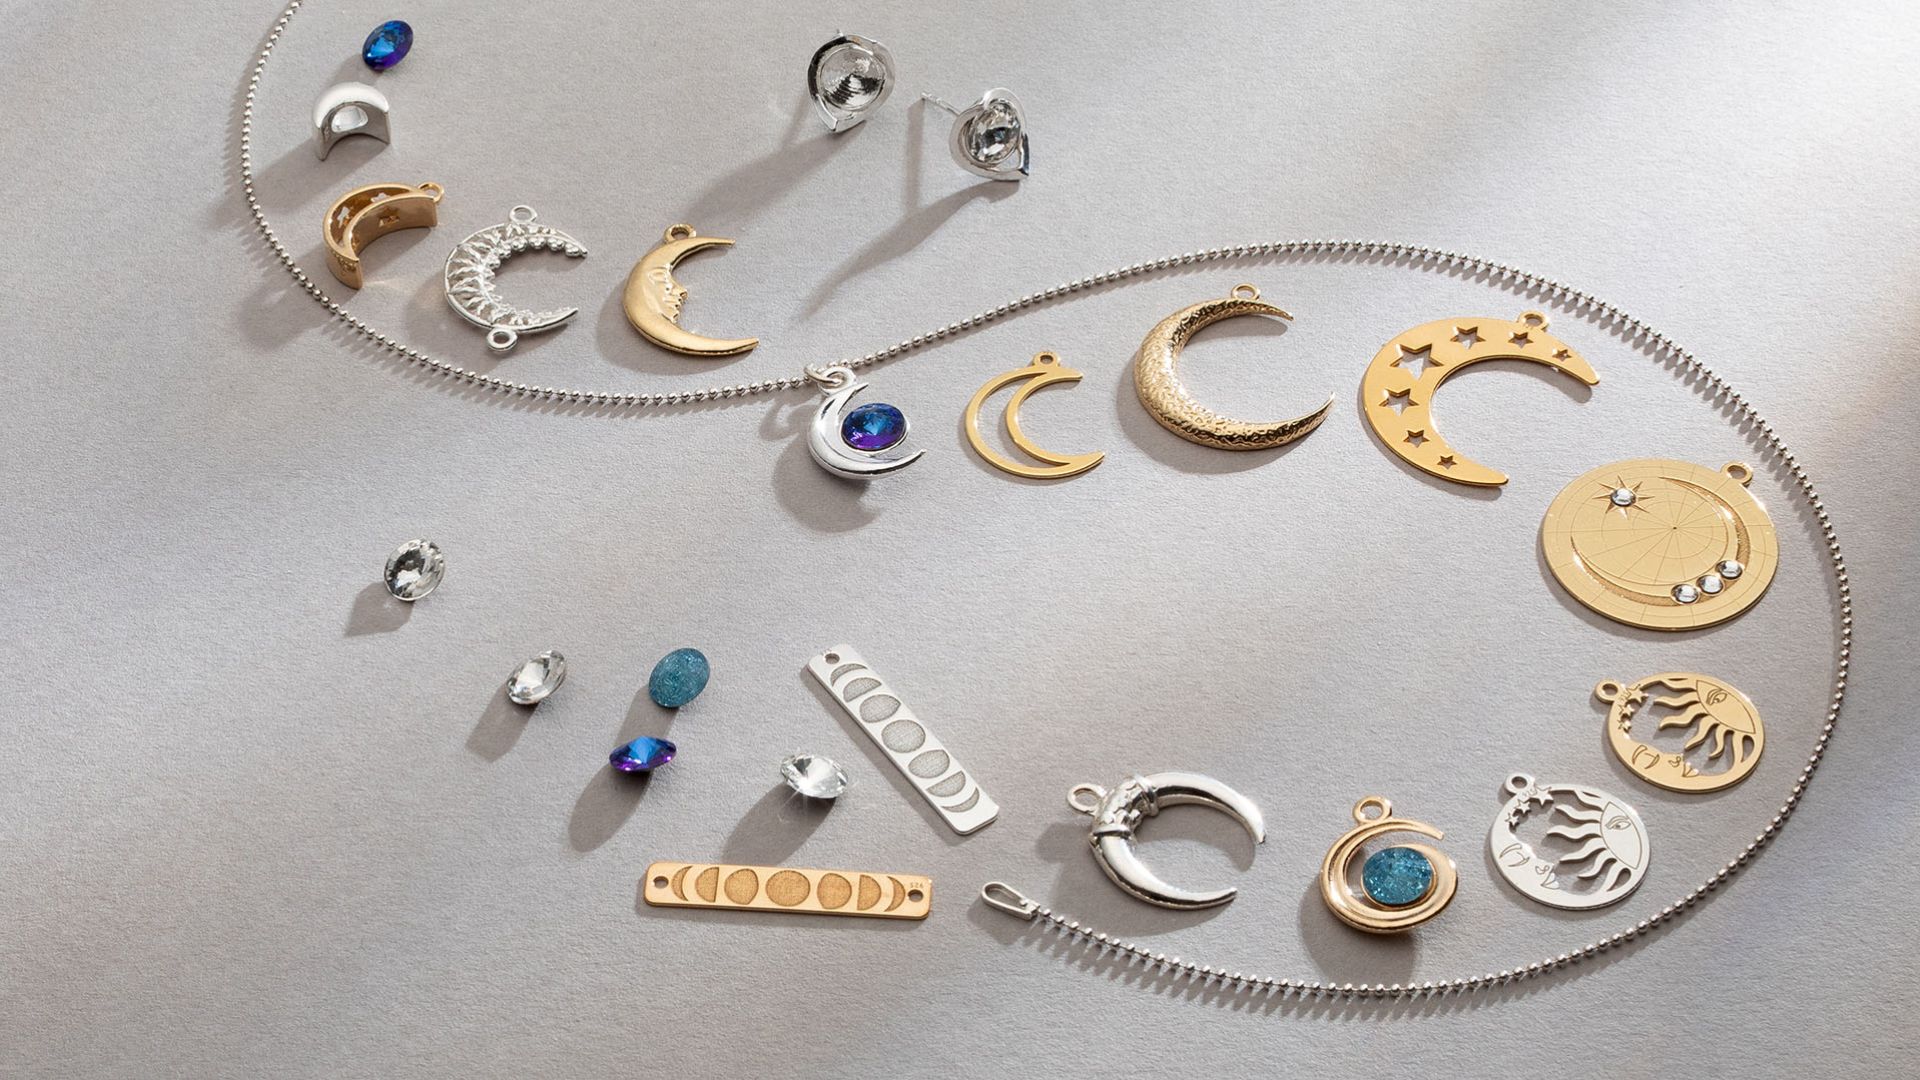 Zodiac Silver Jewelry - How To Choose The Perfect Piece For Your Sign